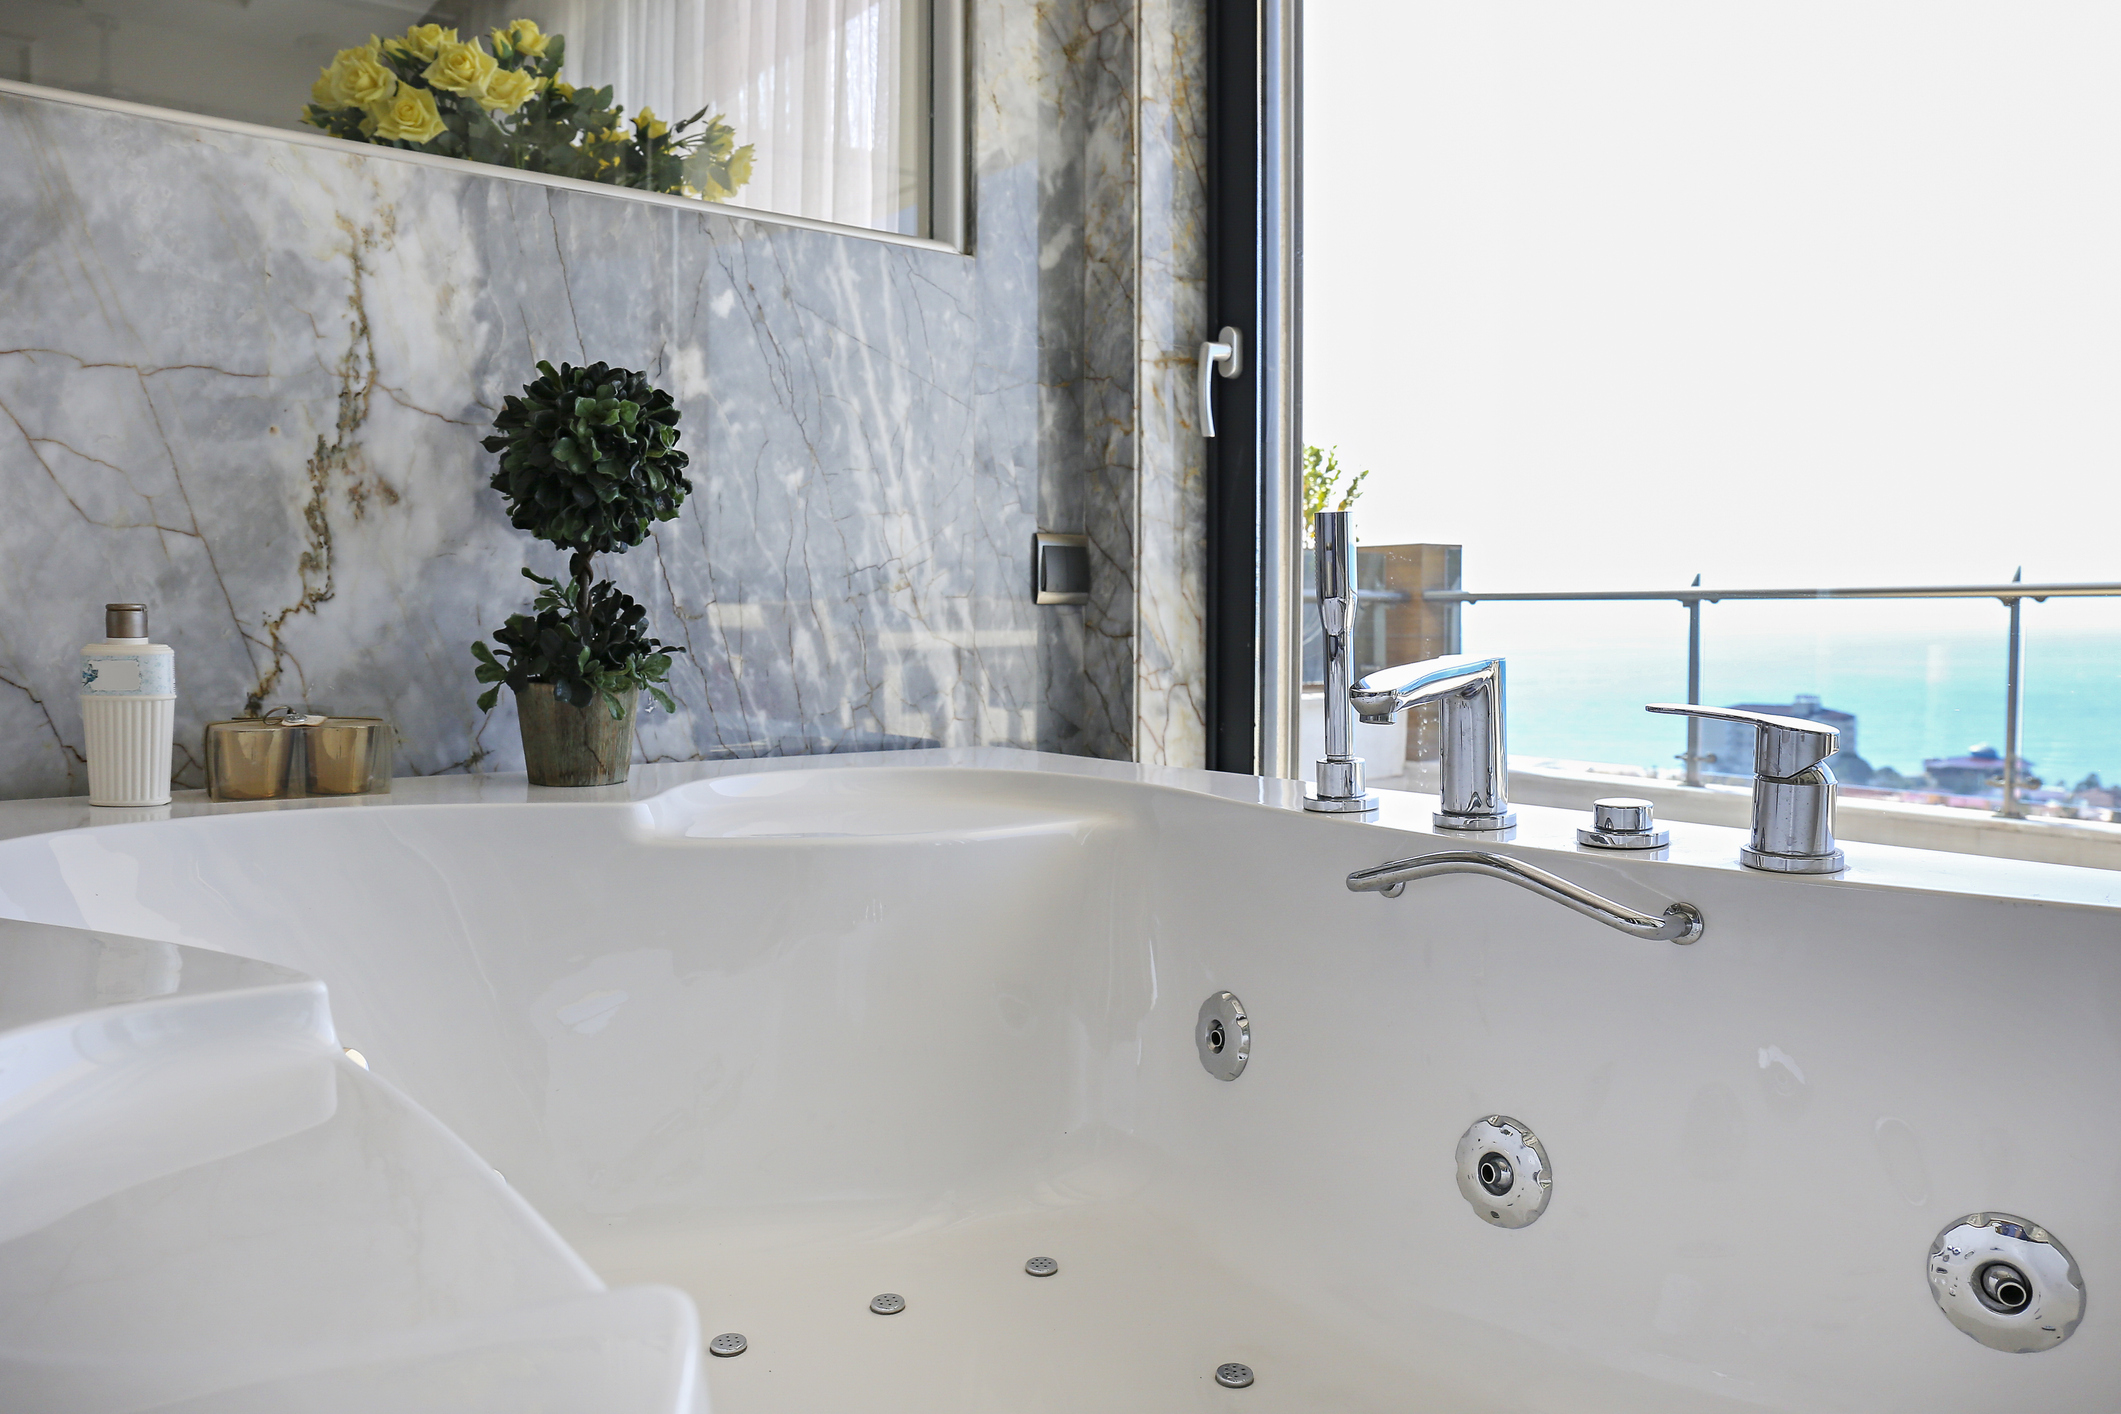 3 Reasons Why a Hydrotherapy Tub Needs to Be In Your Bathroom